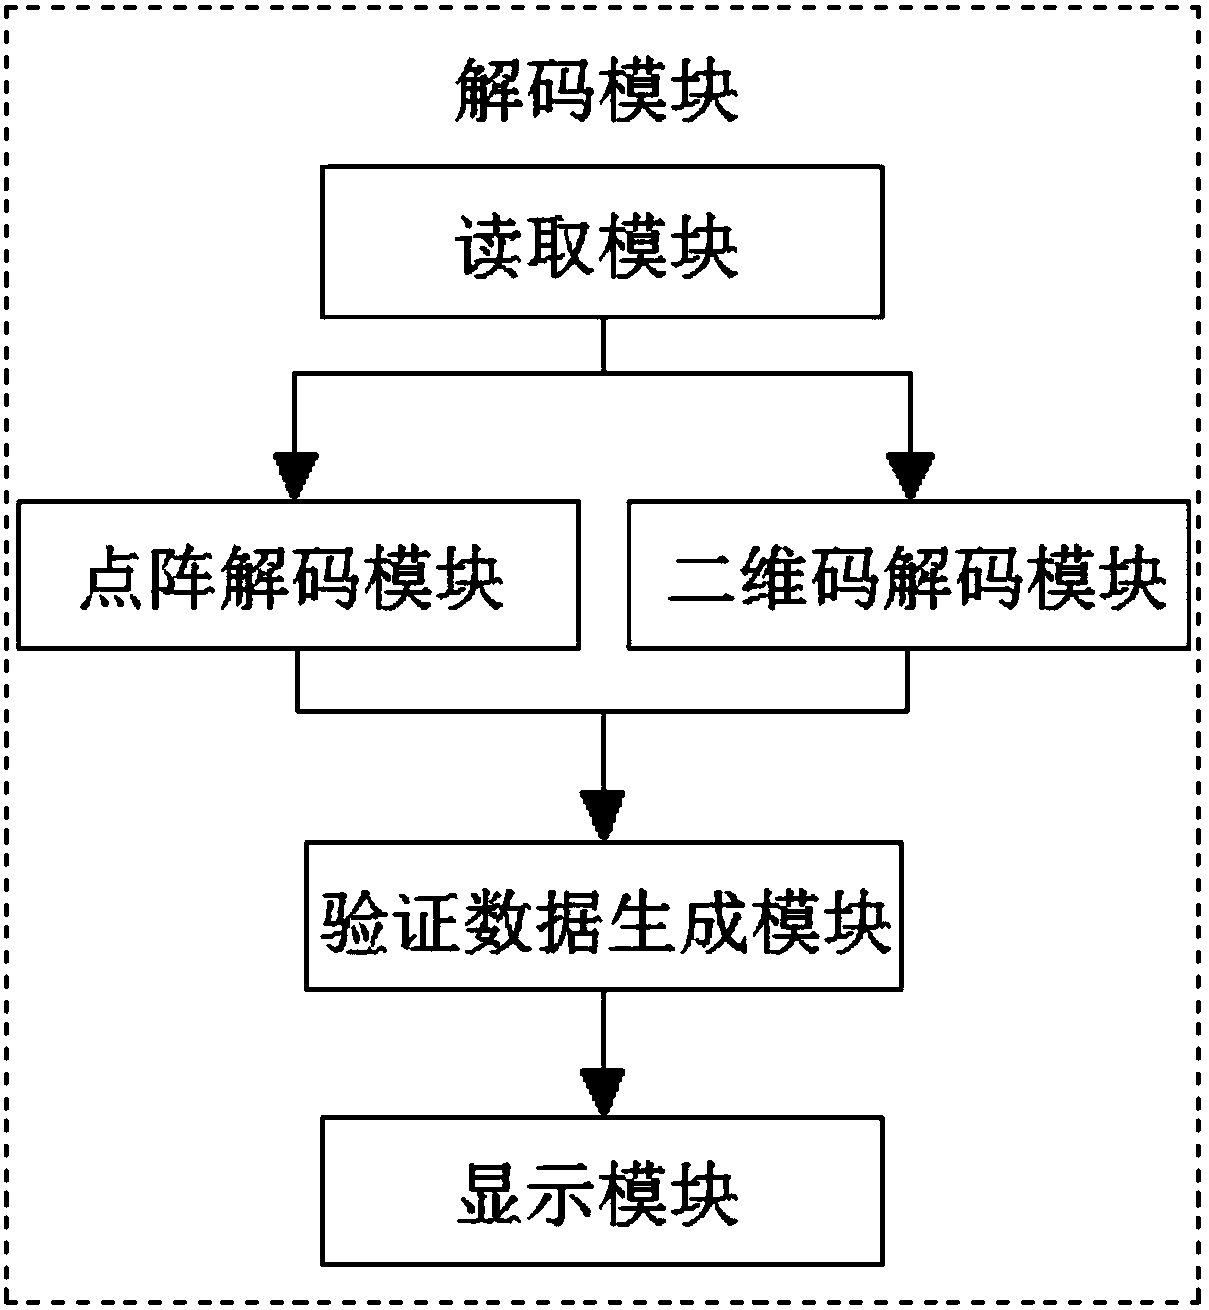 Invisible two-dimensional bar code tracing system